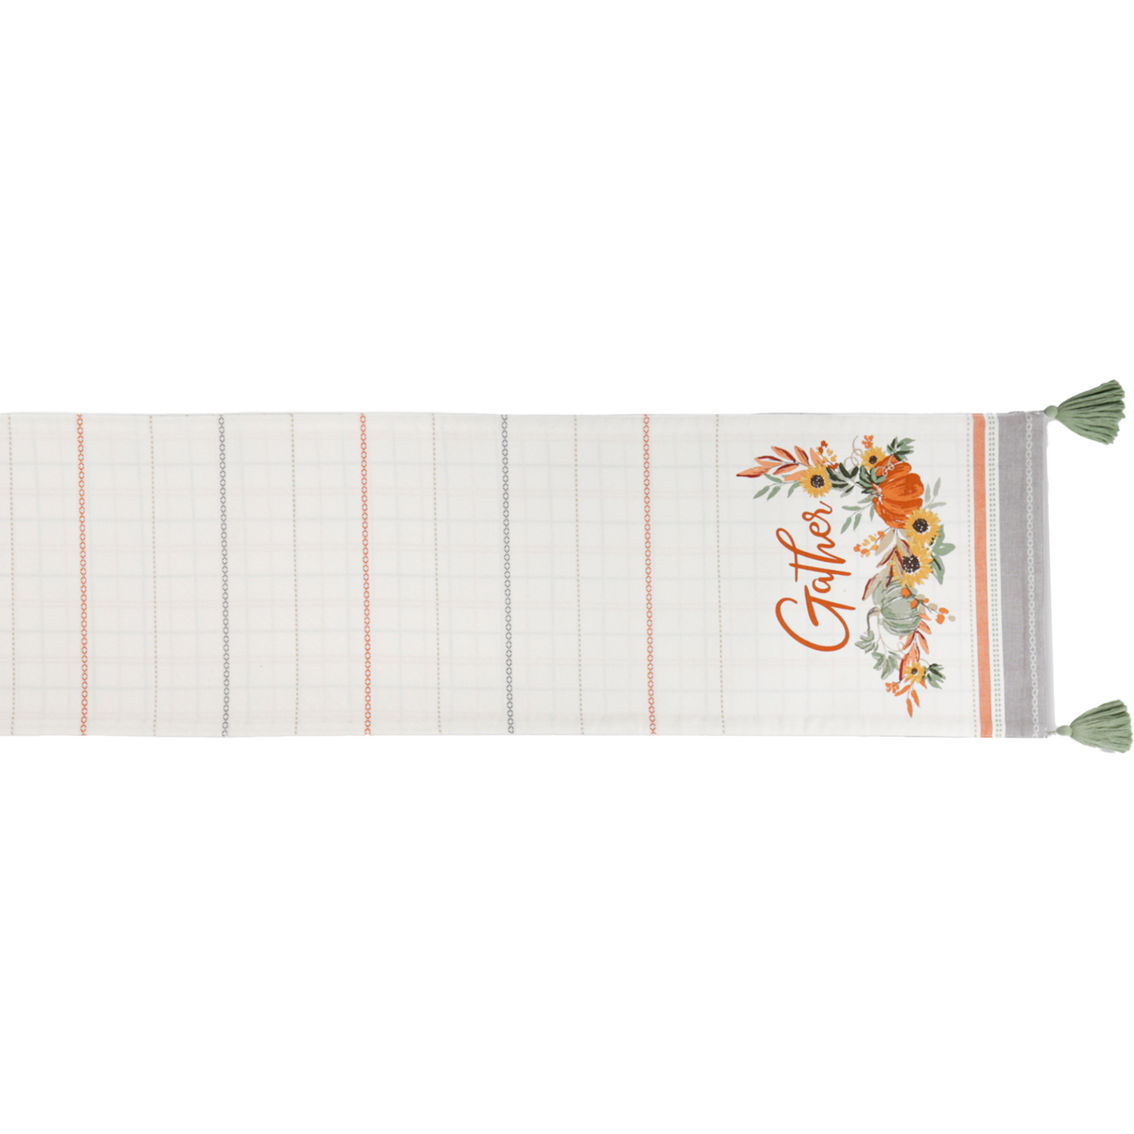 Design Imports 14 x 72 in. Gather Fall Squash Reversible Table Runner - Image 6 of 10